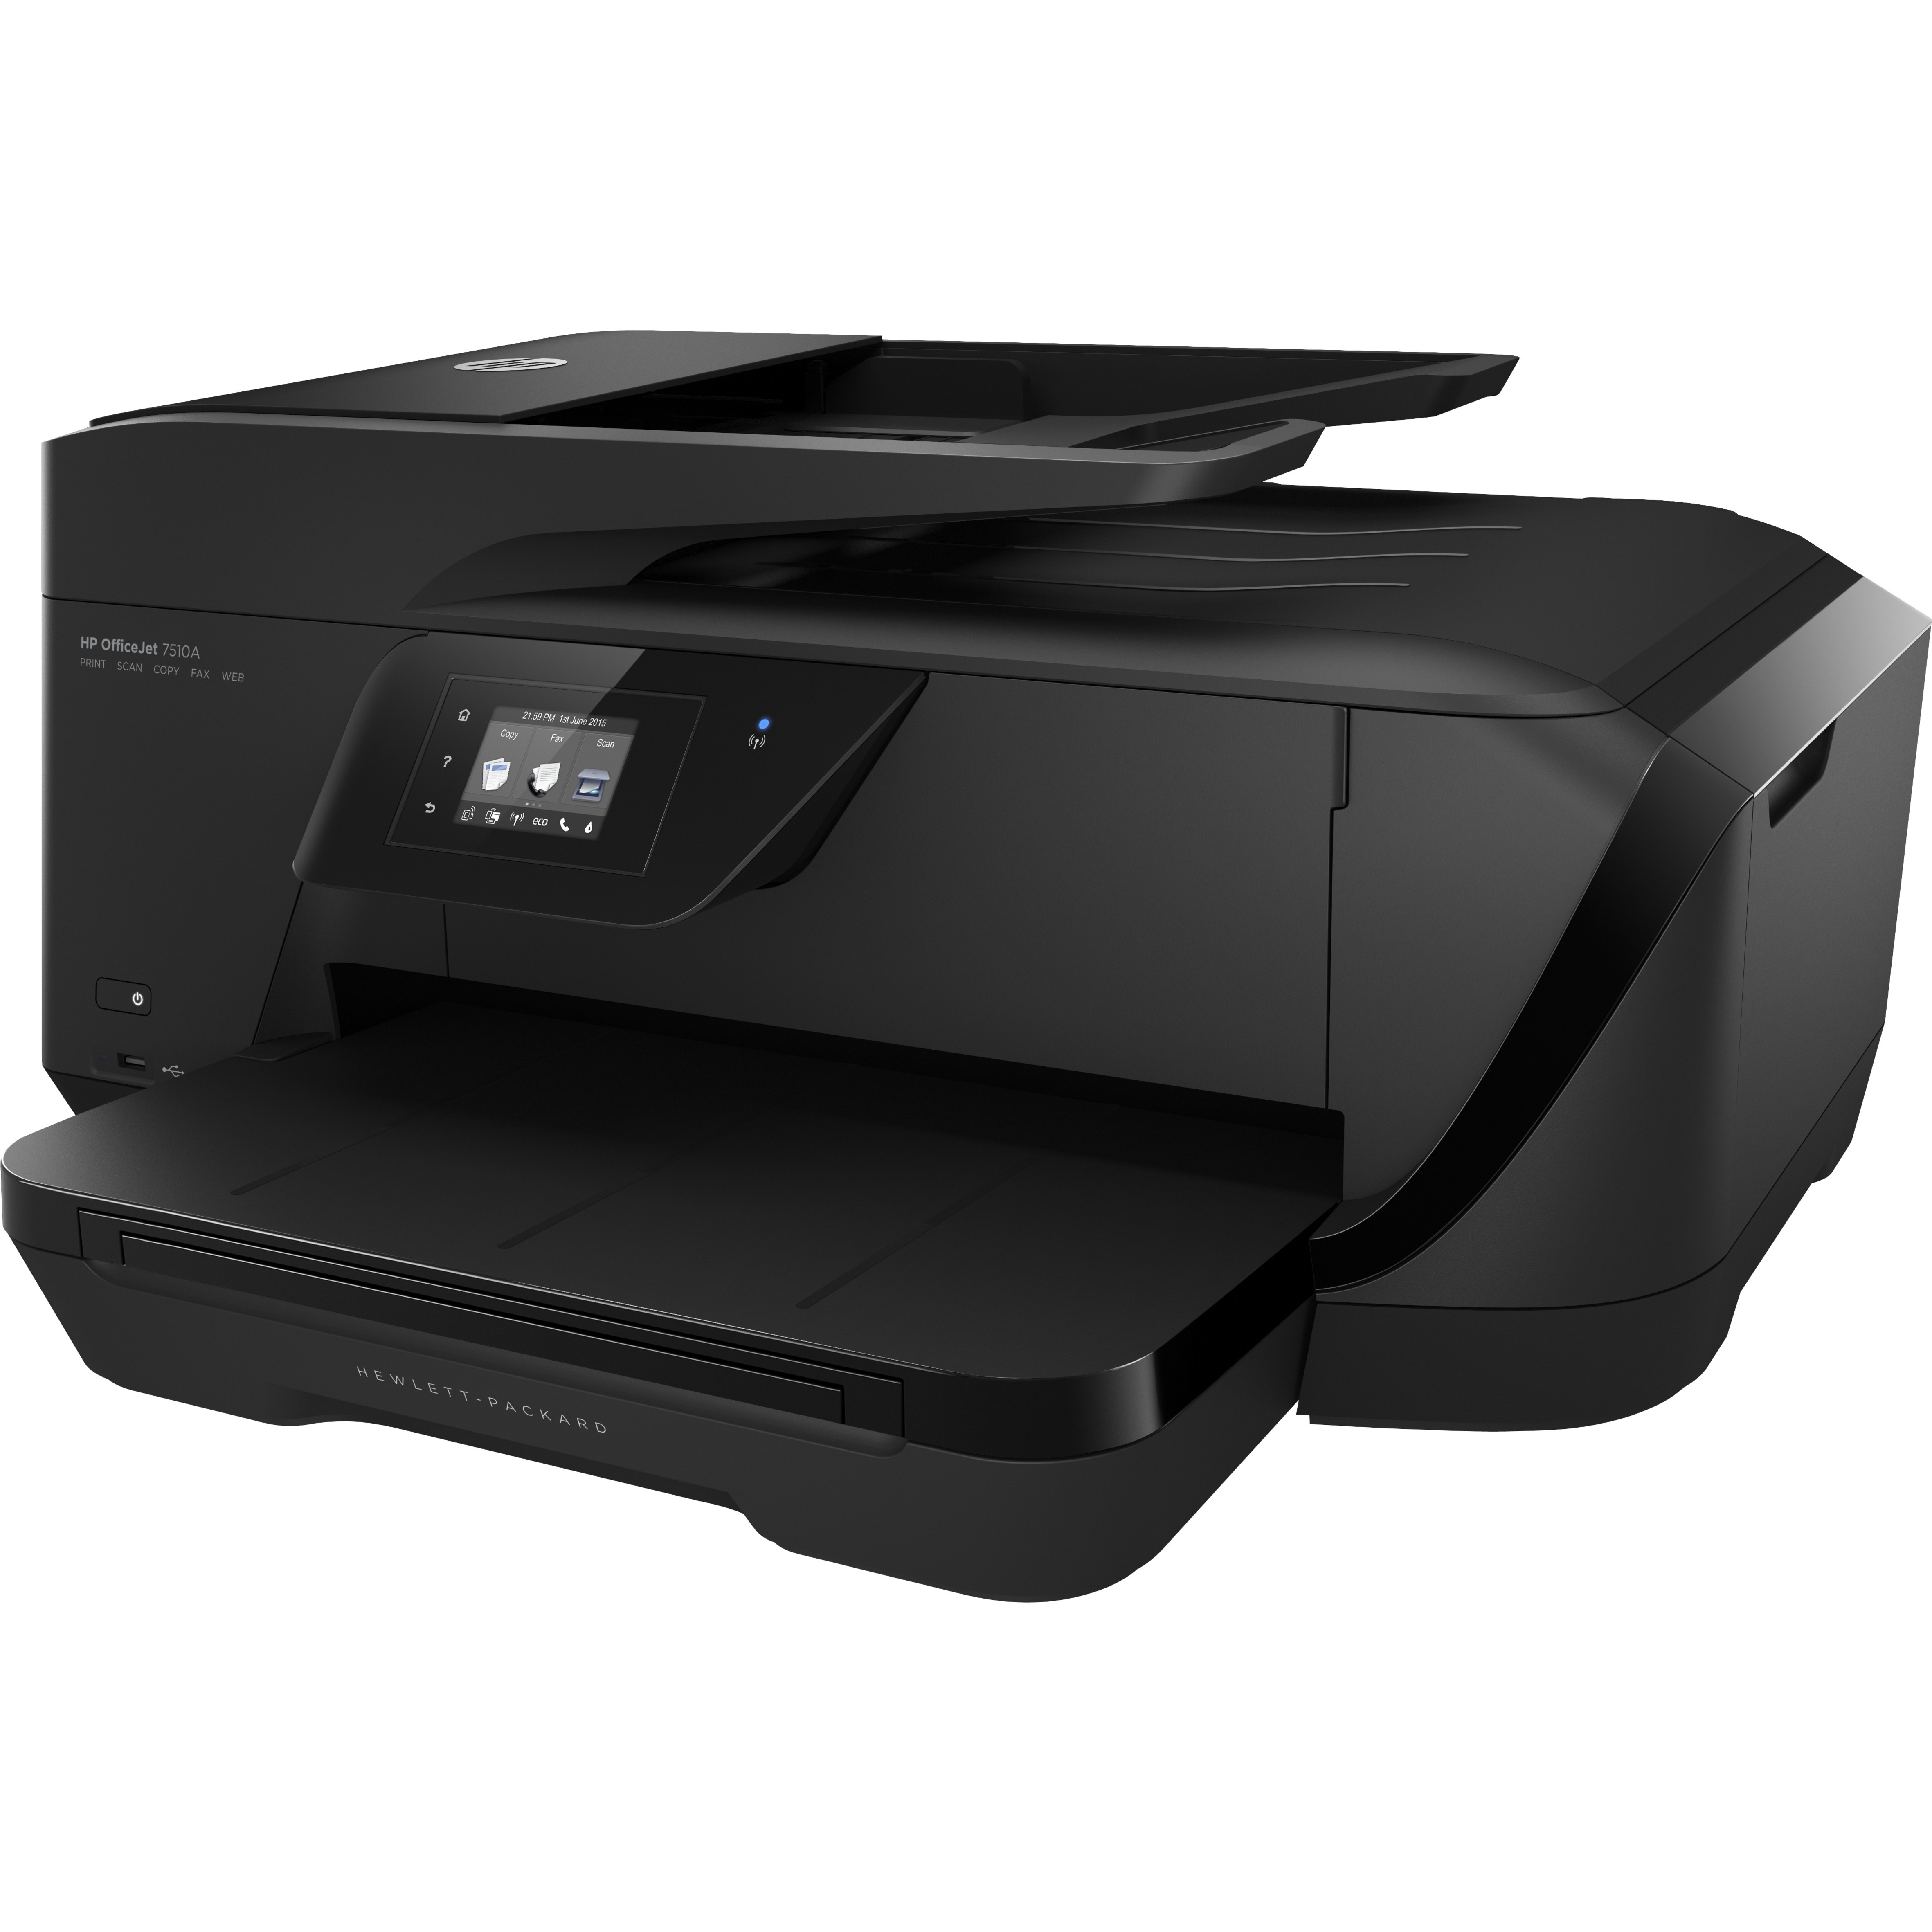 HP Officejet 7510 Wide Format All-in-One - multifunction printer (color) - image 3 of 7